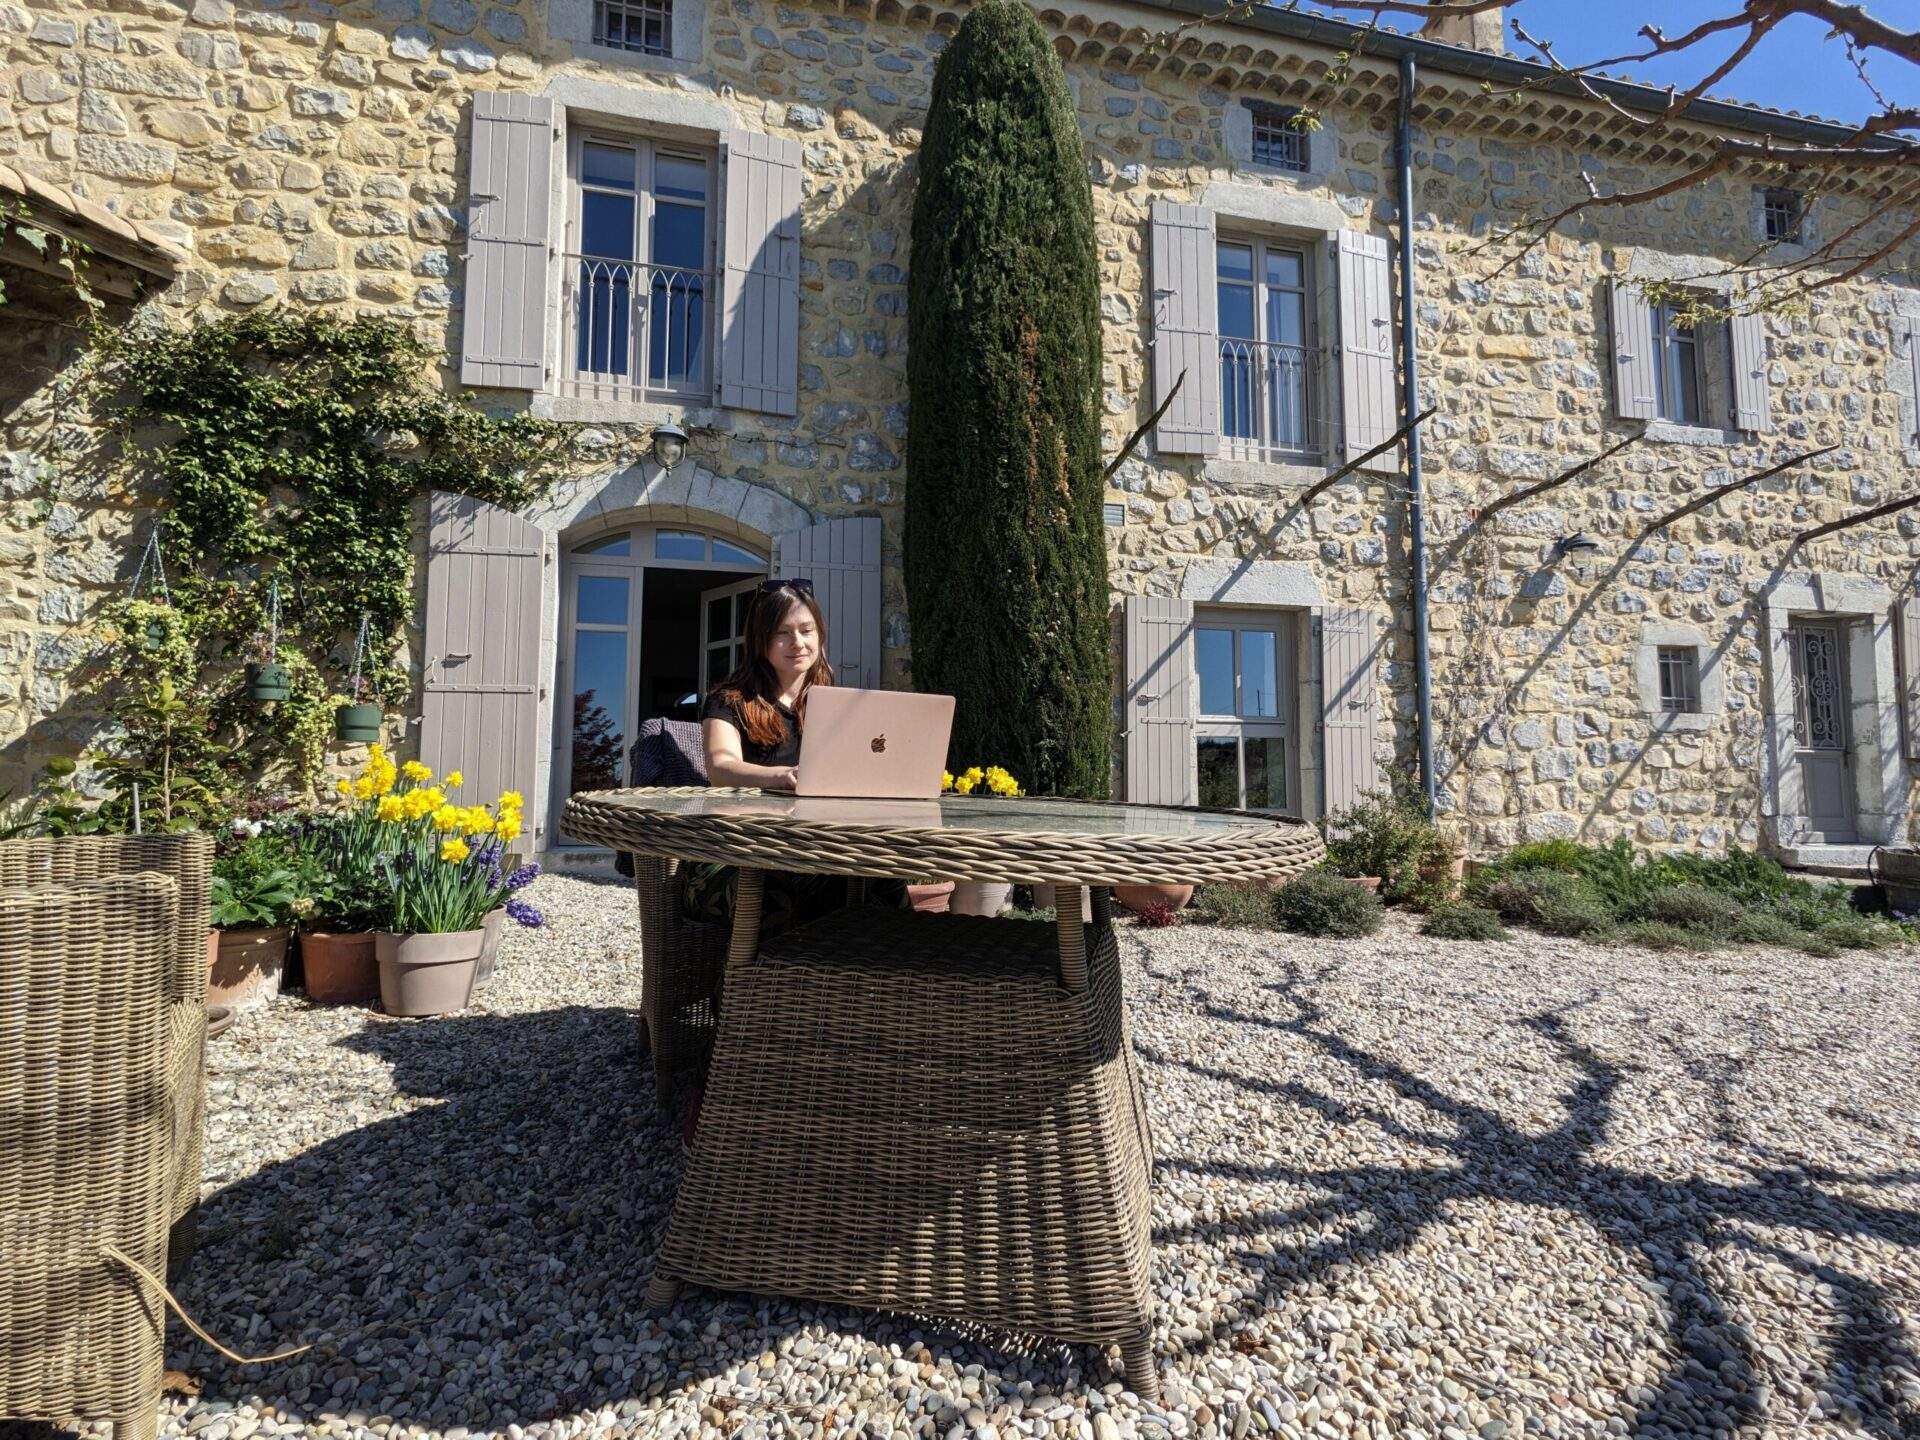 Alice is sat at a wicker table with her Apple Macbook Air. She's working in the sunshine in front of a house she is sitting in the Ardeche in France